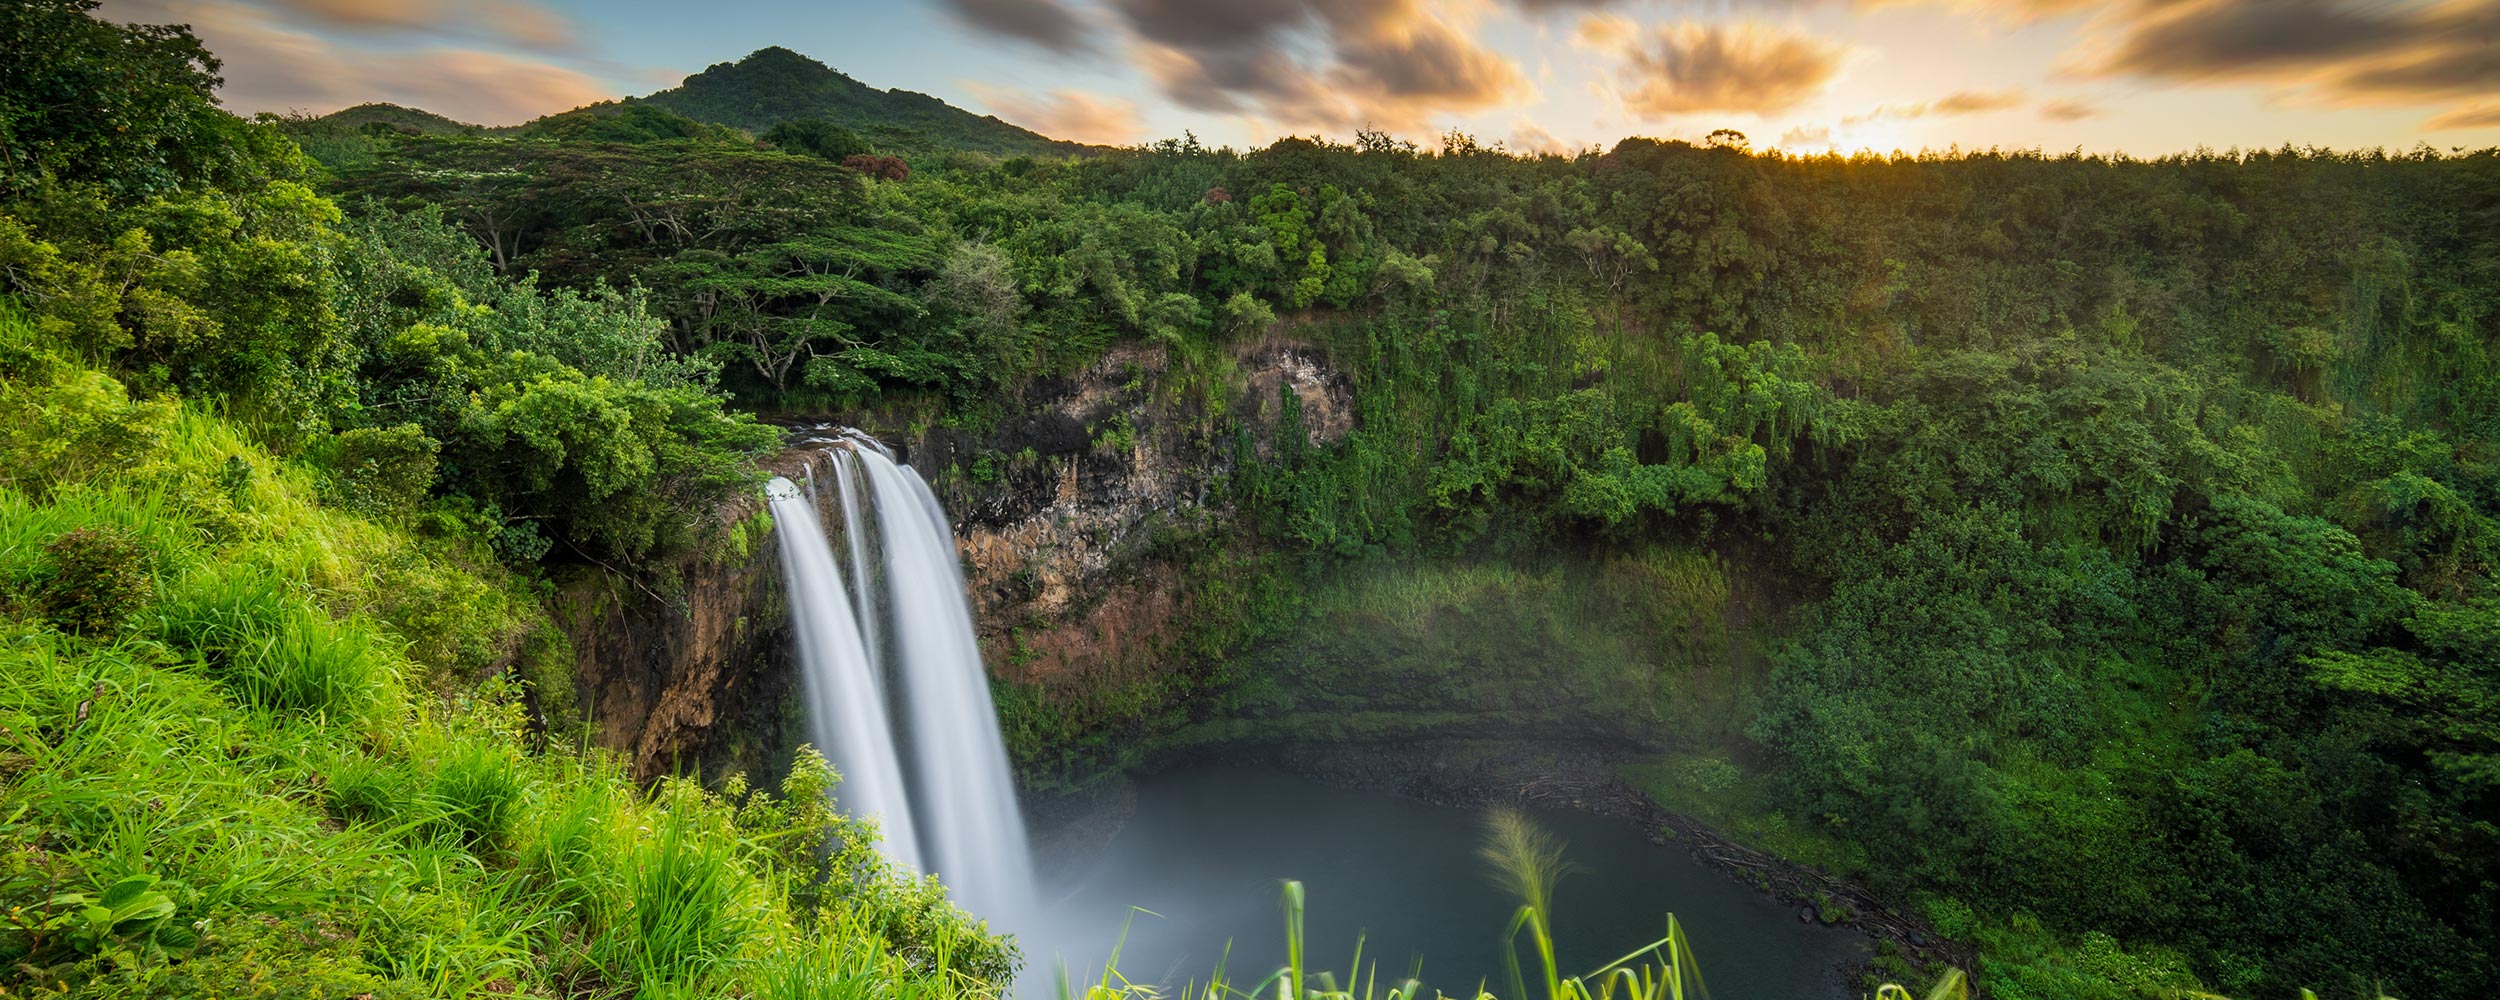 YMT Vacations offers the best value in fullyescorted tours of Hawaii